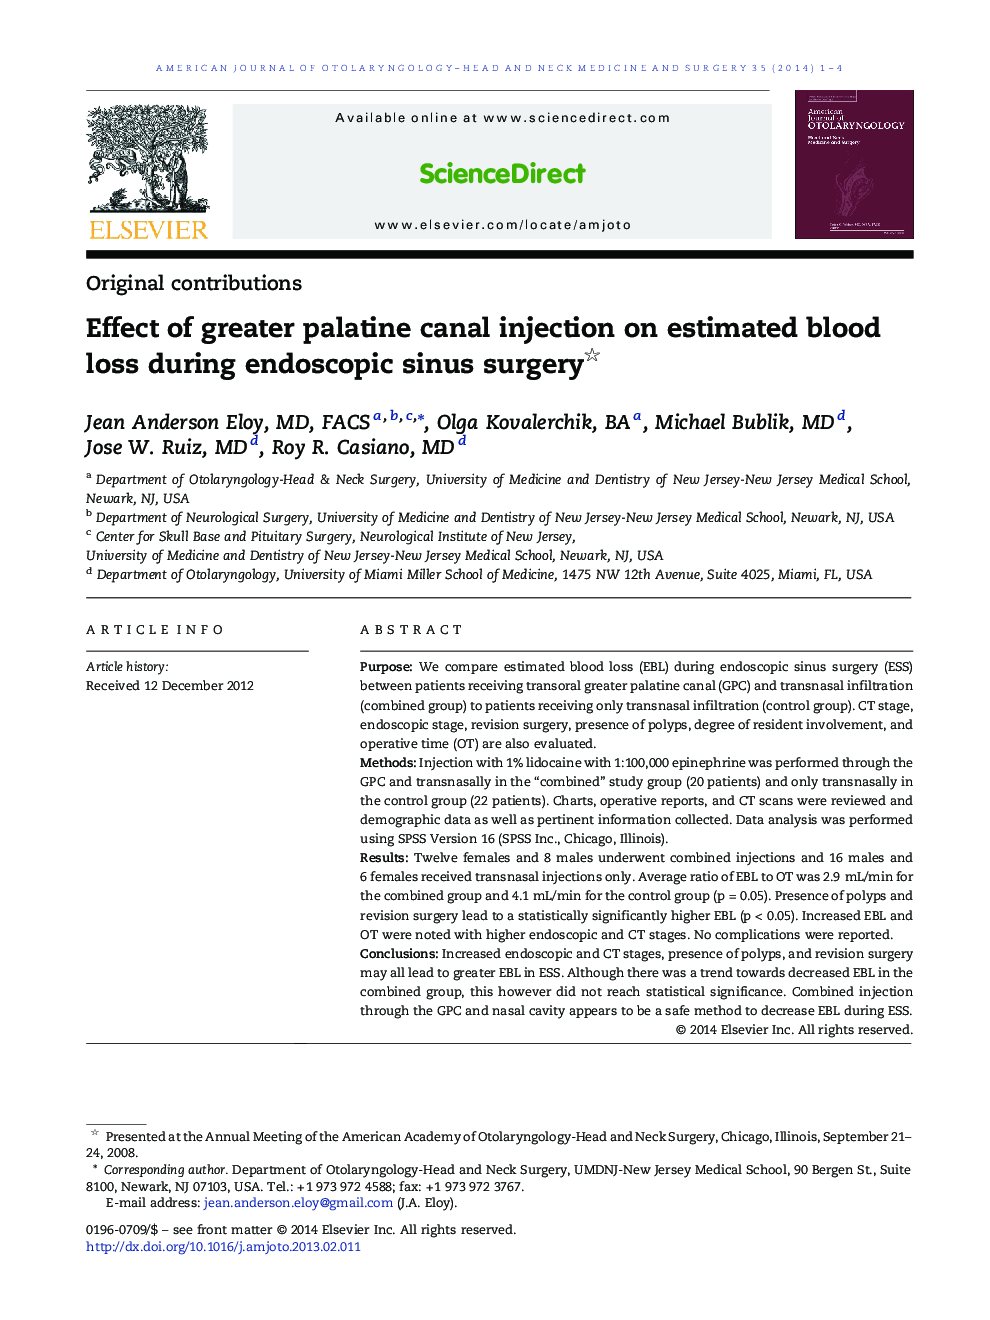 Effect of greater palatine canal injection on estimated blood loss during endoscopic sinus surgery 